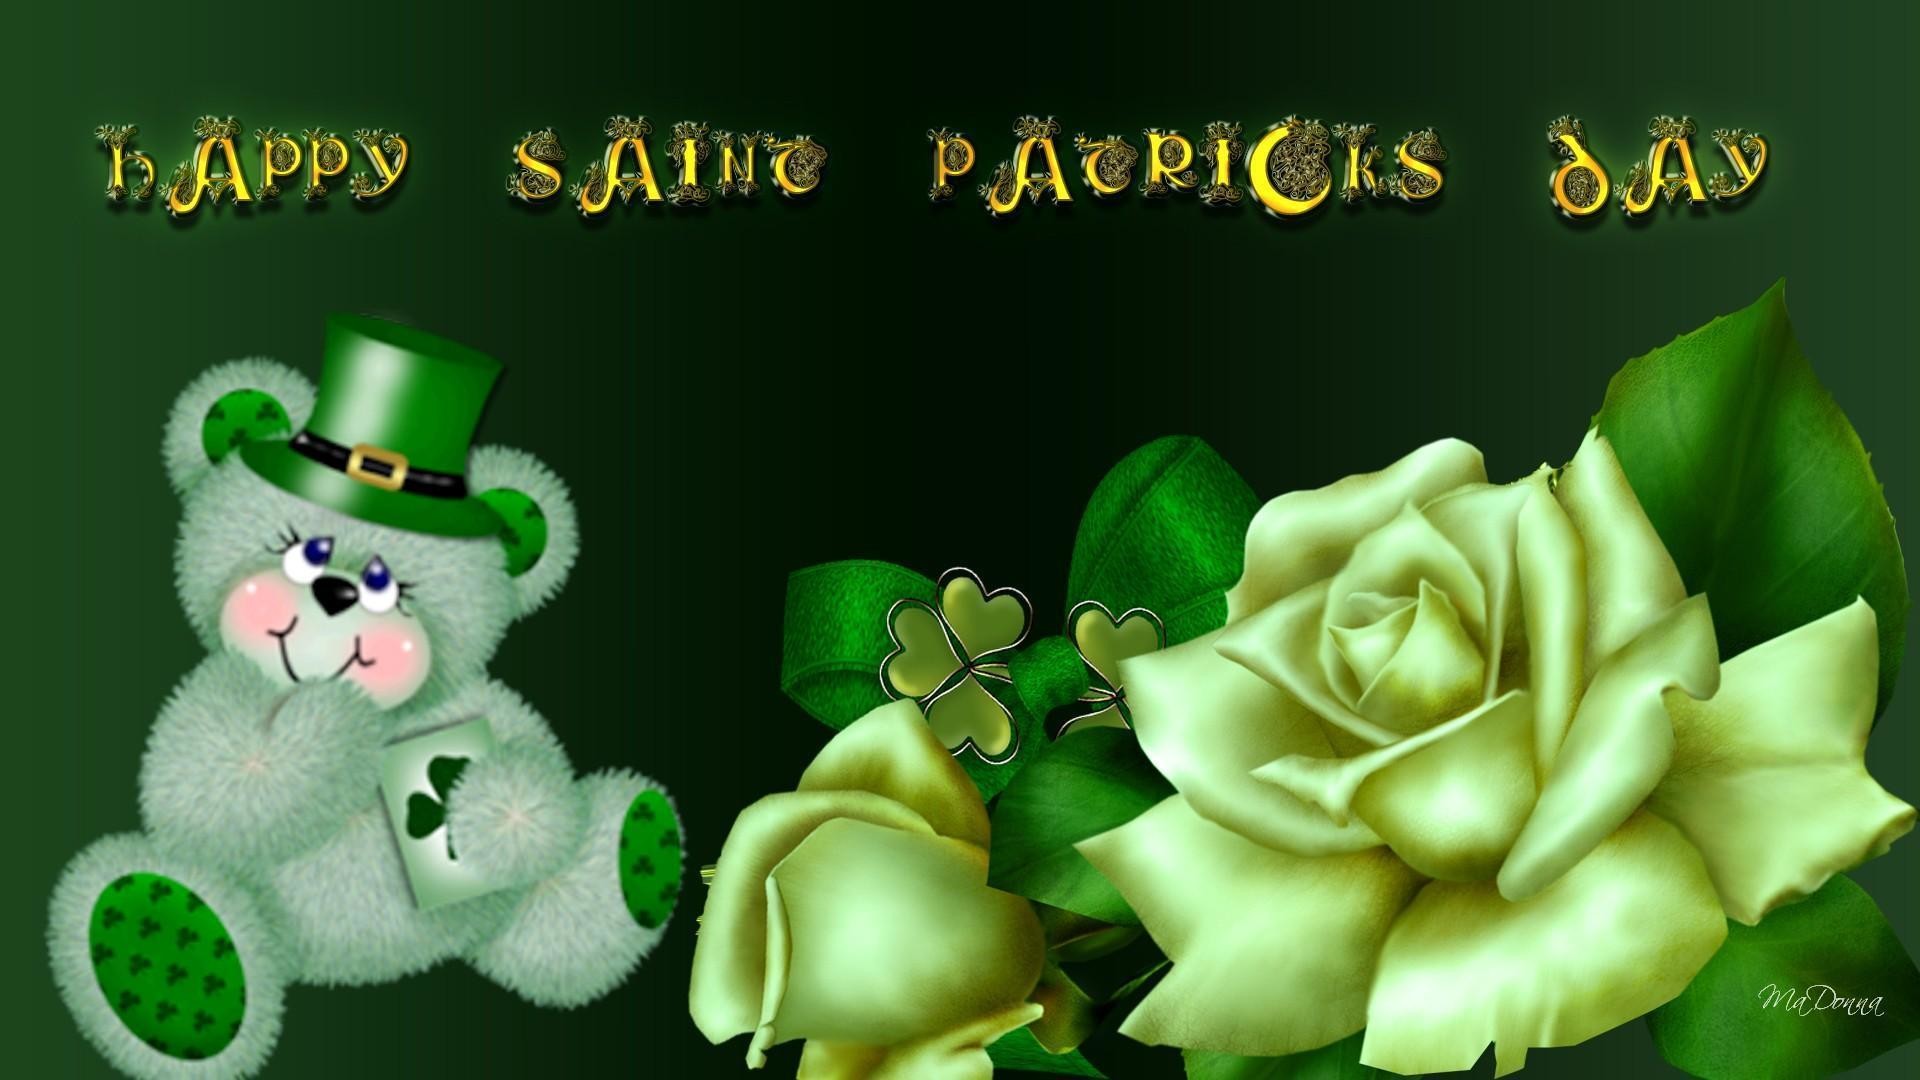 1920x1080 SNOOPY ST. PATRICK'S DAY Flag | Holiday, The Snoopy Way! | Pinterest